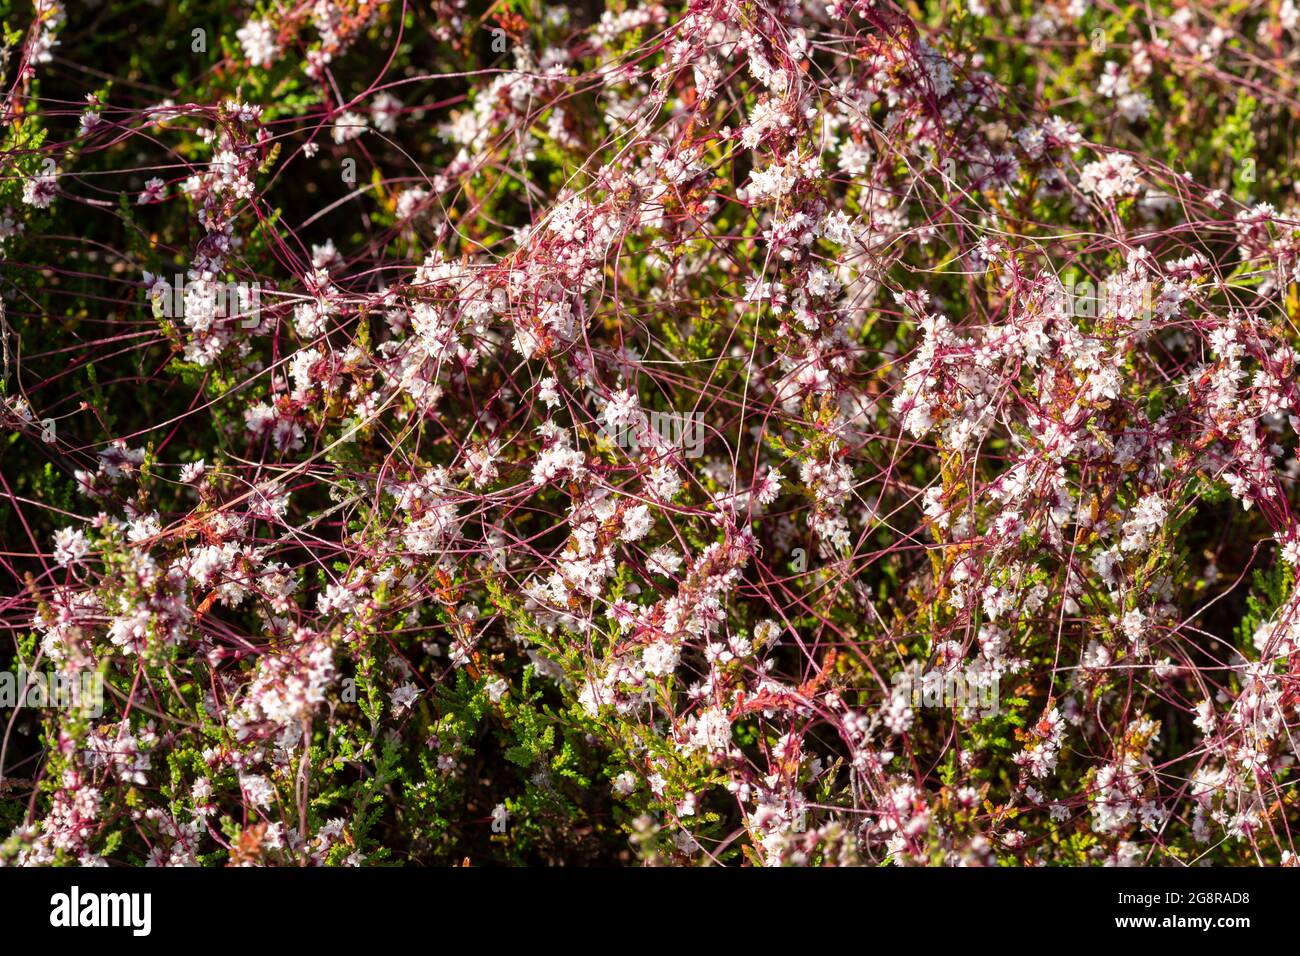 Common dodder (Cuscuta epithymum) flowering during July or summer, UK. Dodder is a parasitic plant, here it is parasitizing heather (Calluna vulgaris) Stock Photo